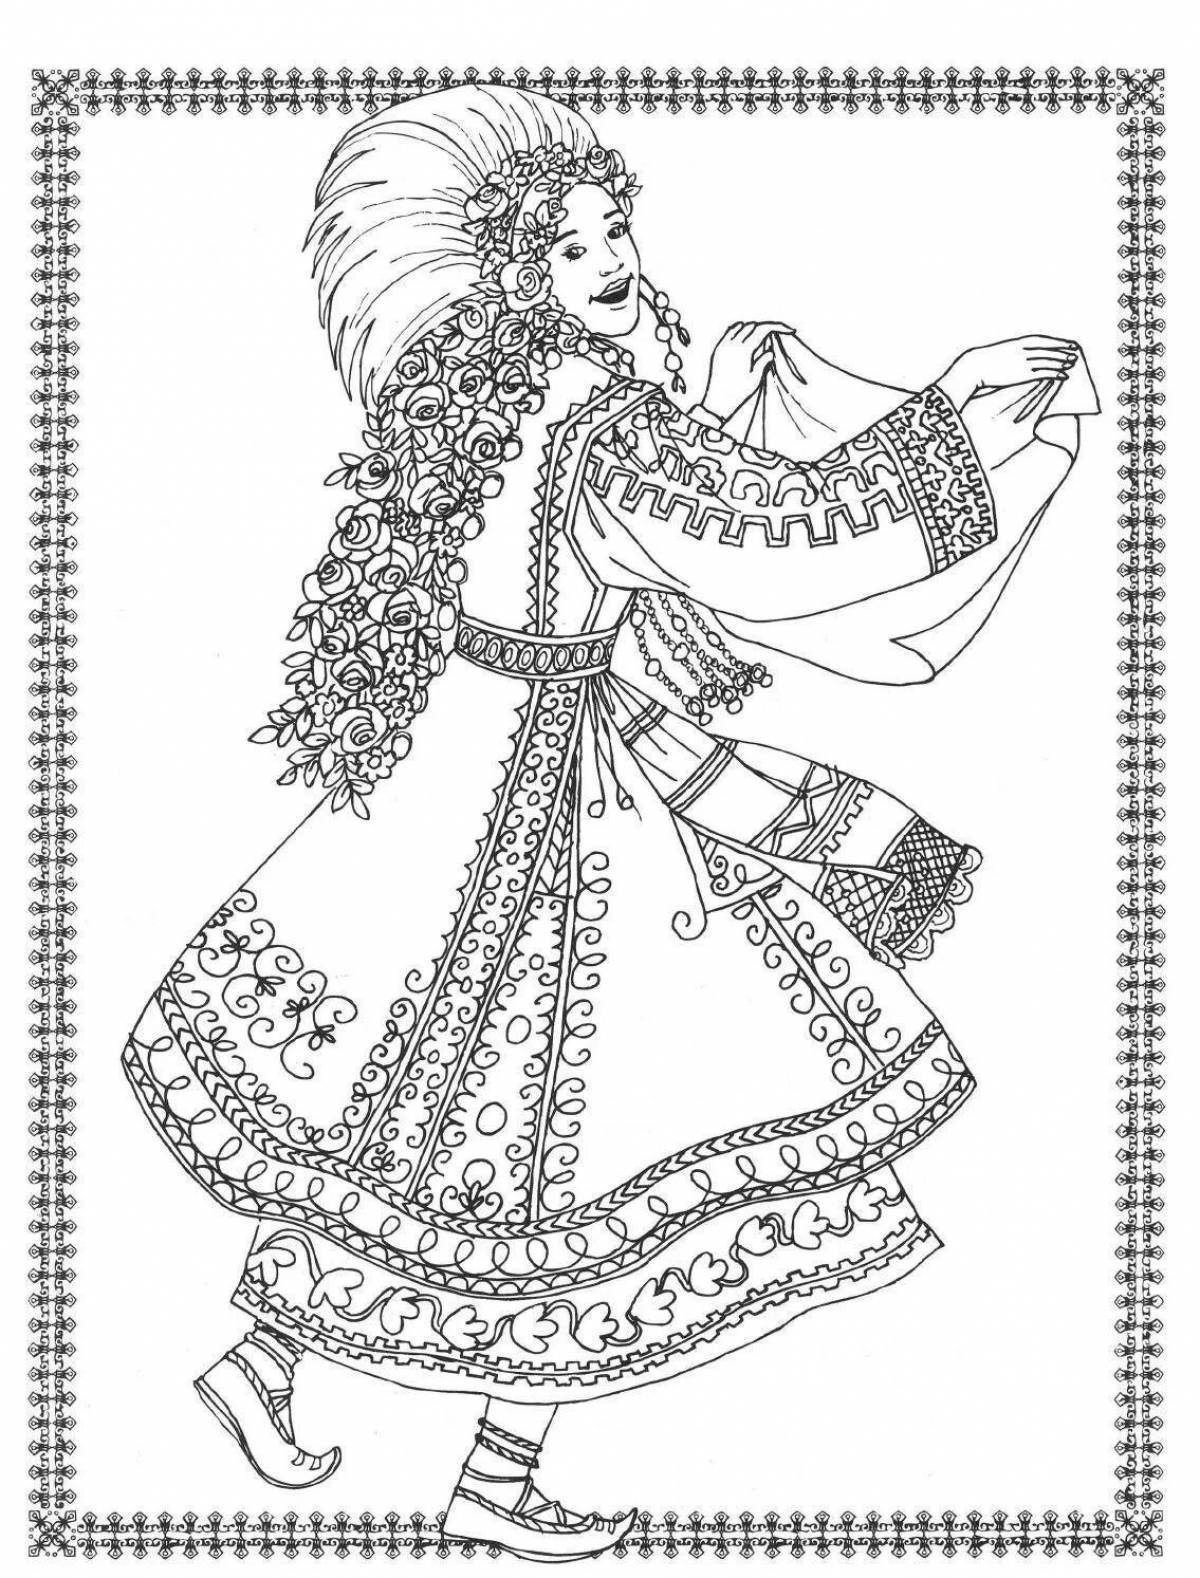 Colouring page amazing belarusian national costume